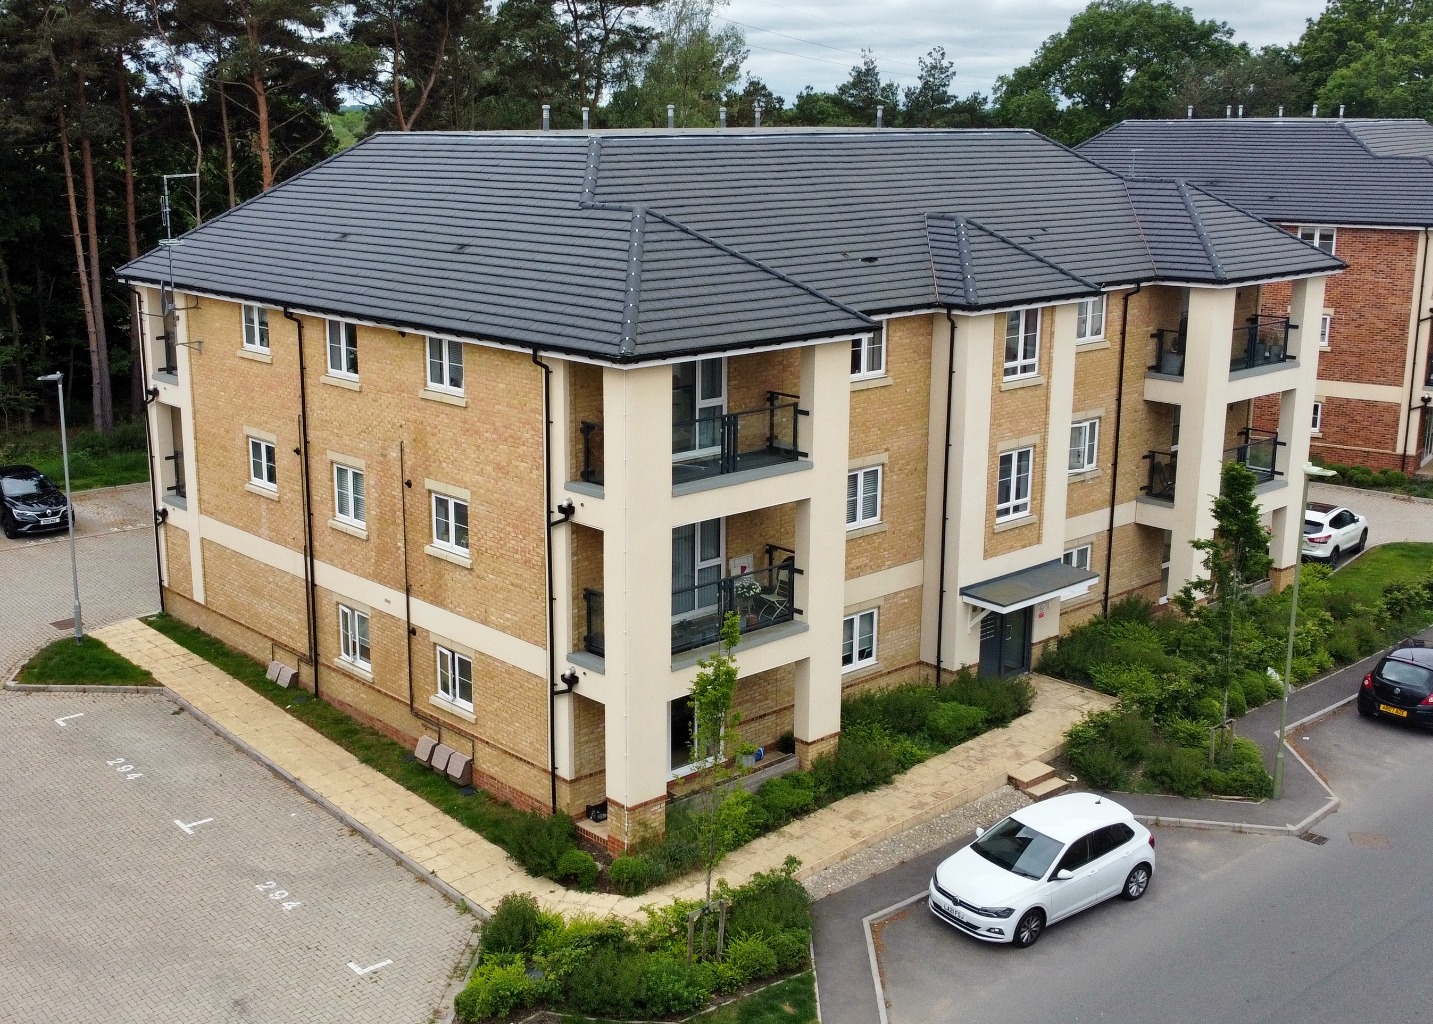 2 bed ground floor flat for sale in Hurst Avenue, Camberley, GU17